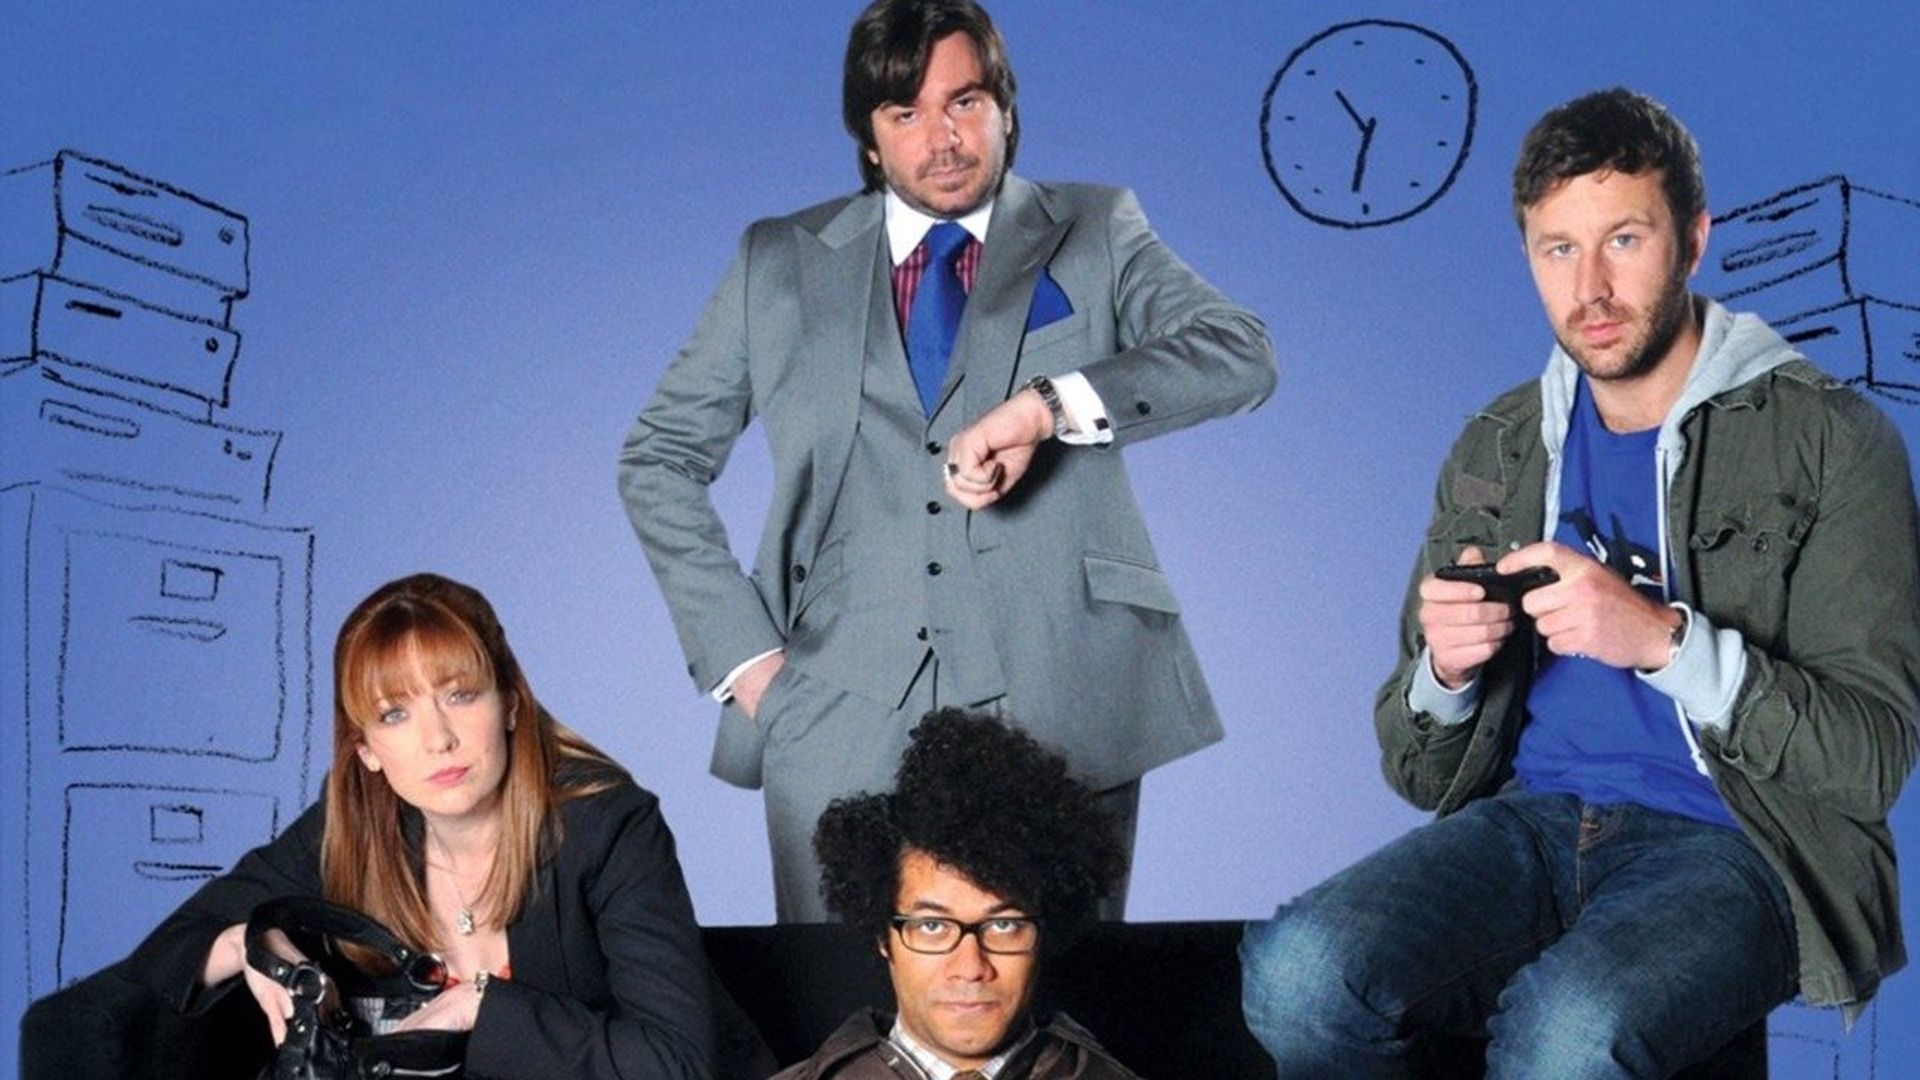 1920x1080 The IT Crowd Watch Episodes on Netflix or Streaming Online | Reelgood